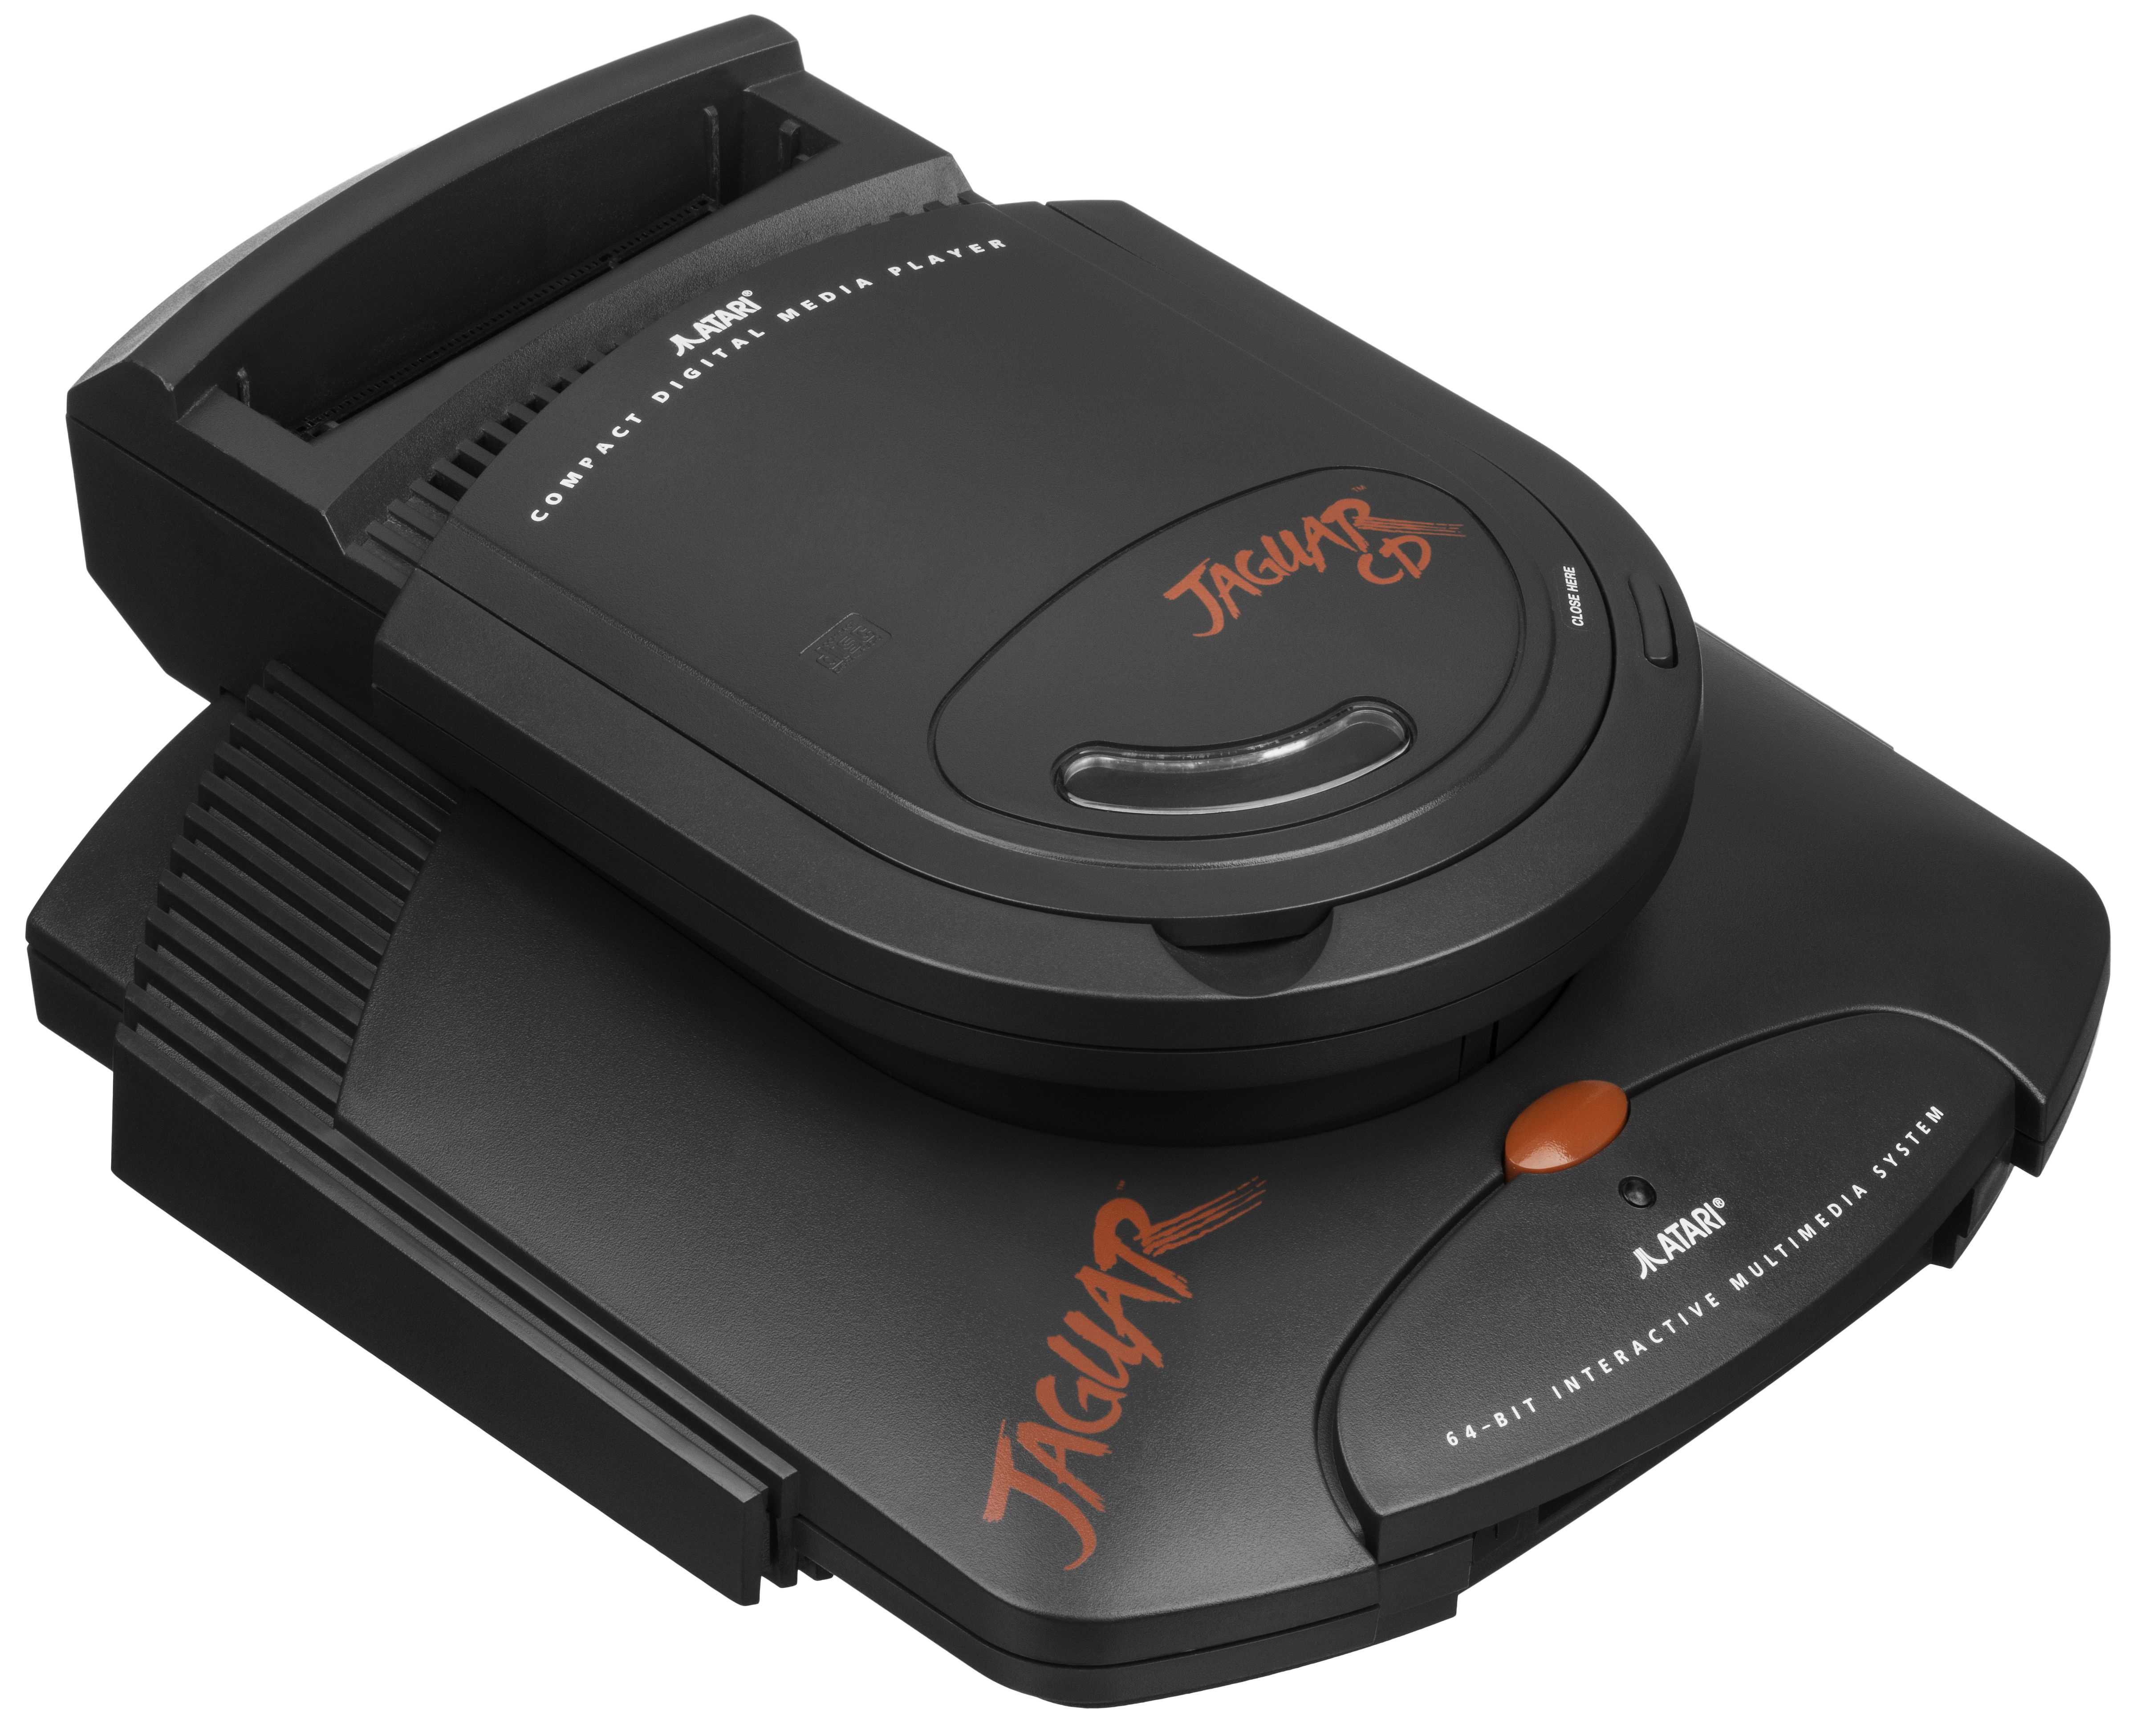 The Atari Jaguar home console expansion module without controller shown.